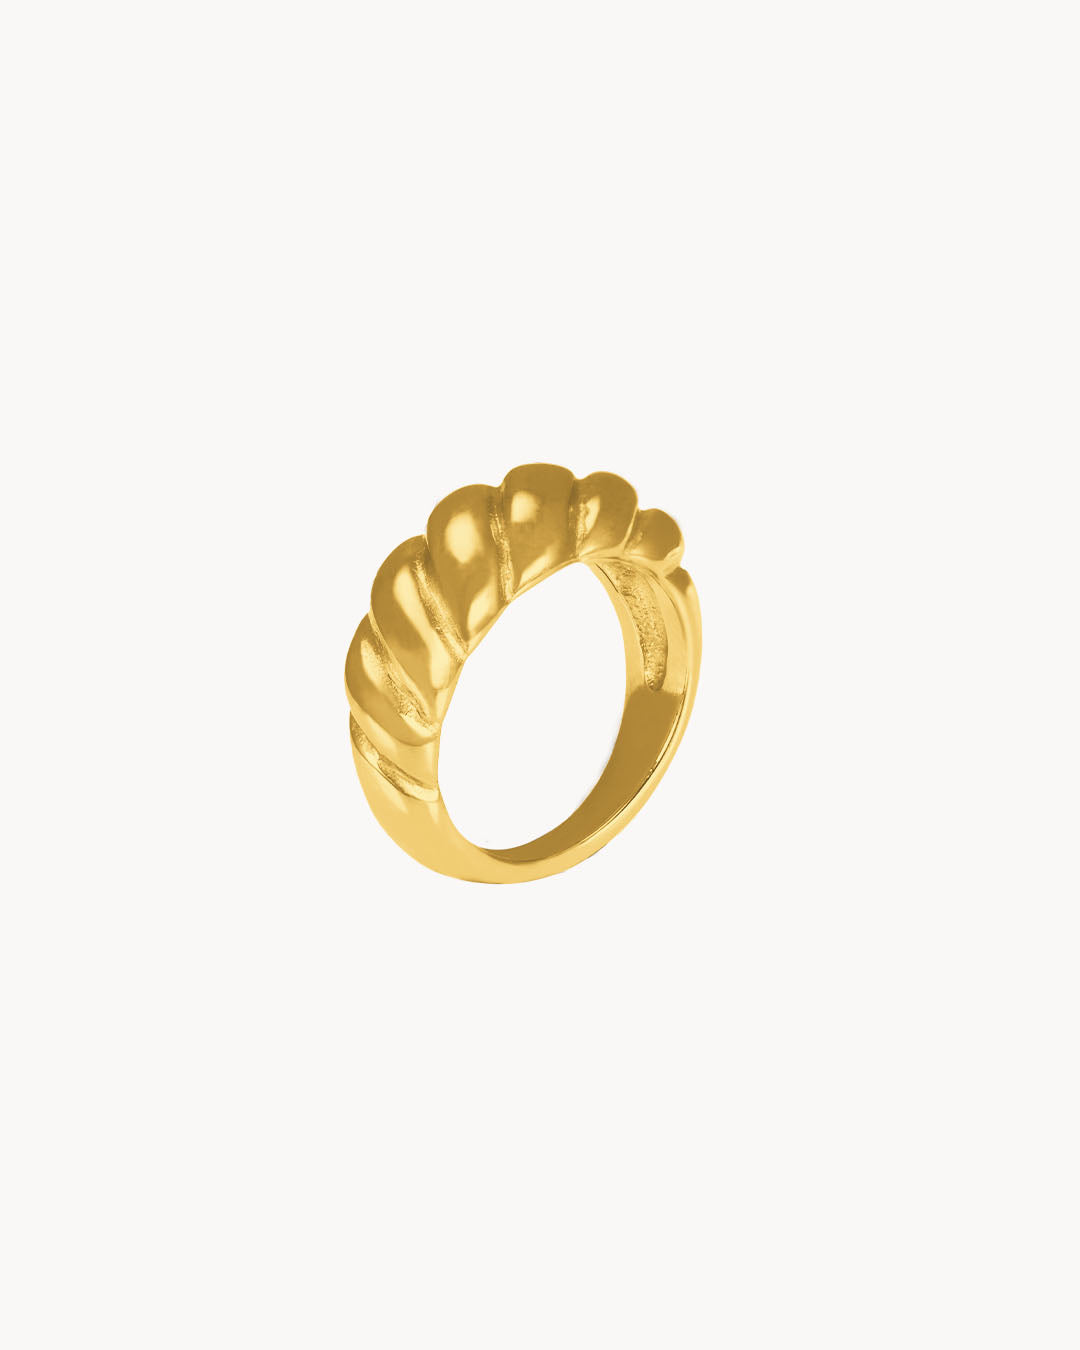 The Croissant Ring